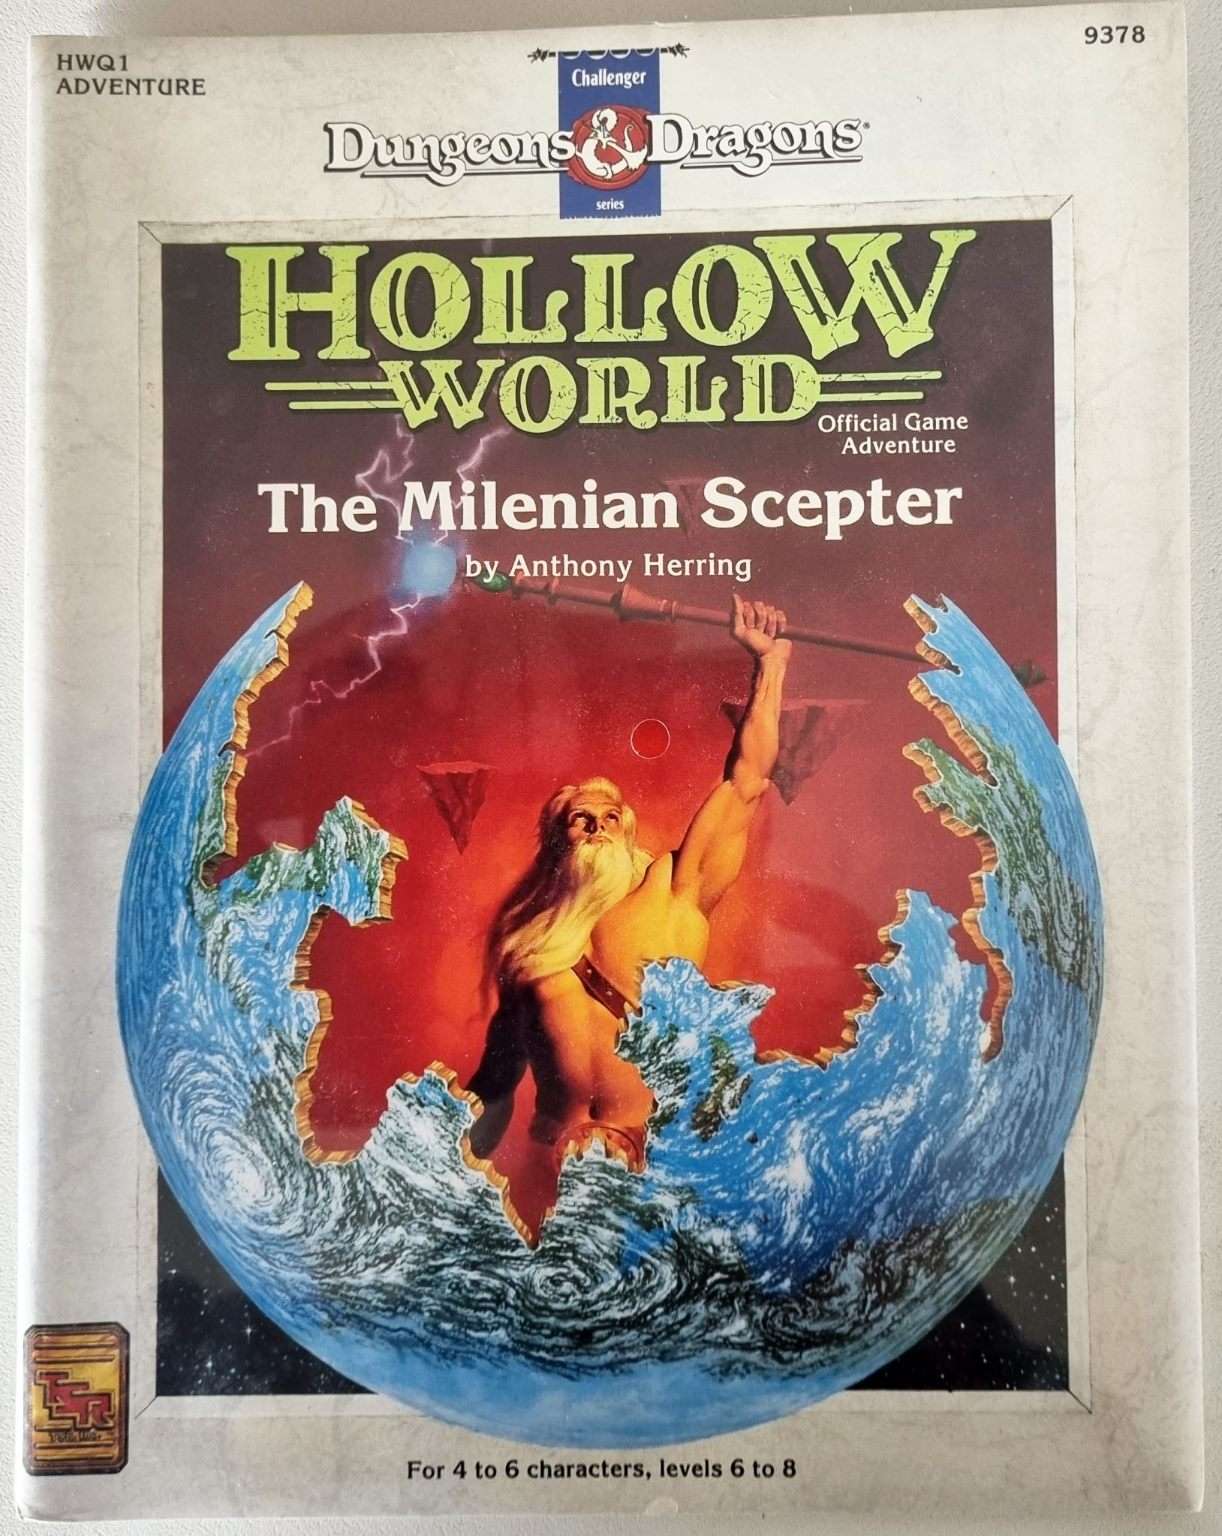 Dungeons and Dragons - Hollow World: The Milenian Scepter (HWQ1 9378) Sealed Default Title